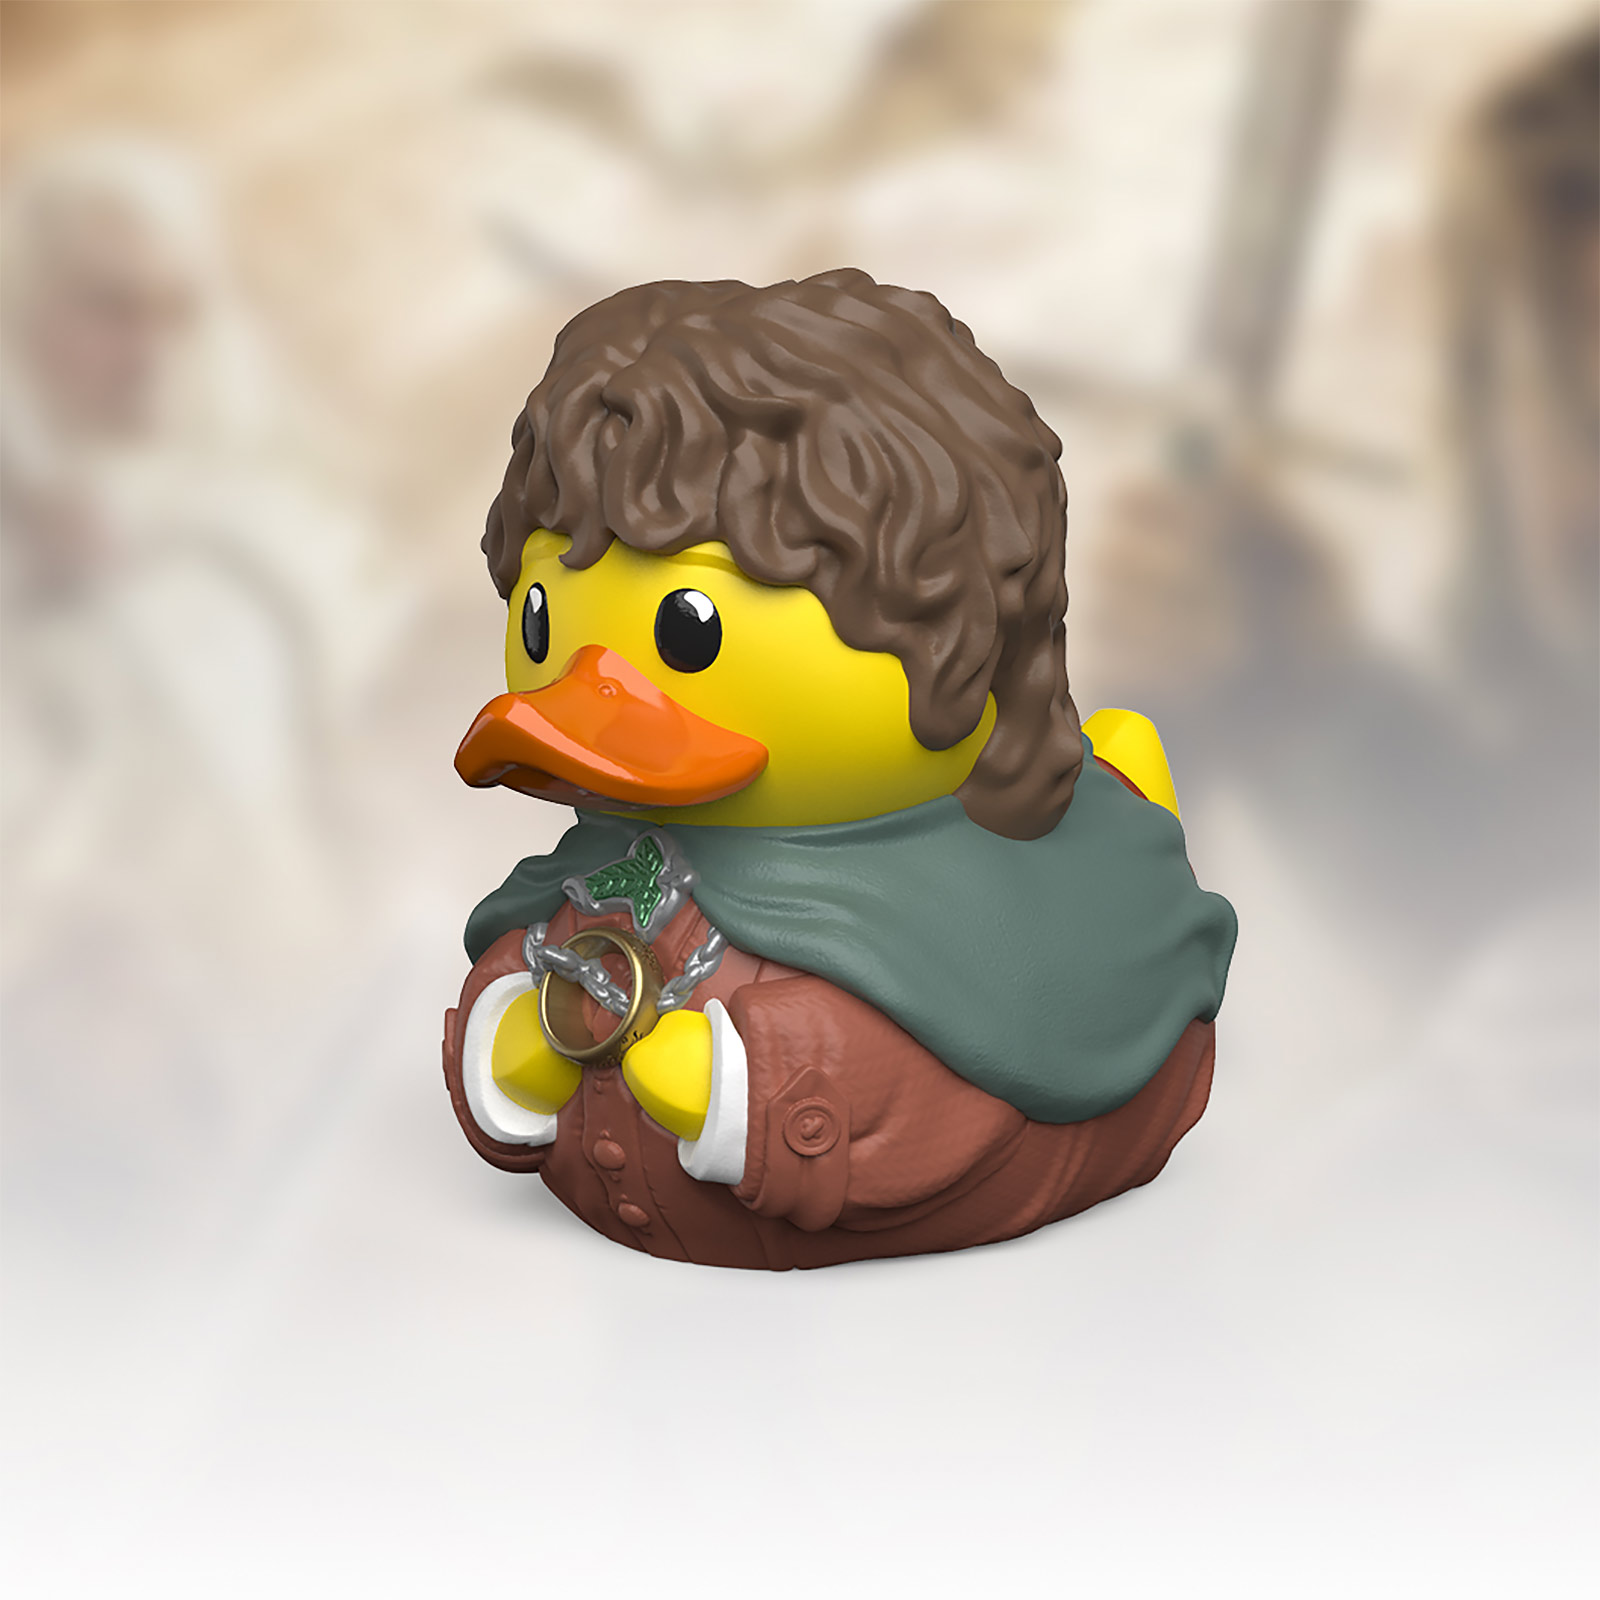 Lord of the Rings - Frodo TUBBZ Decorative Duck